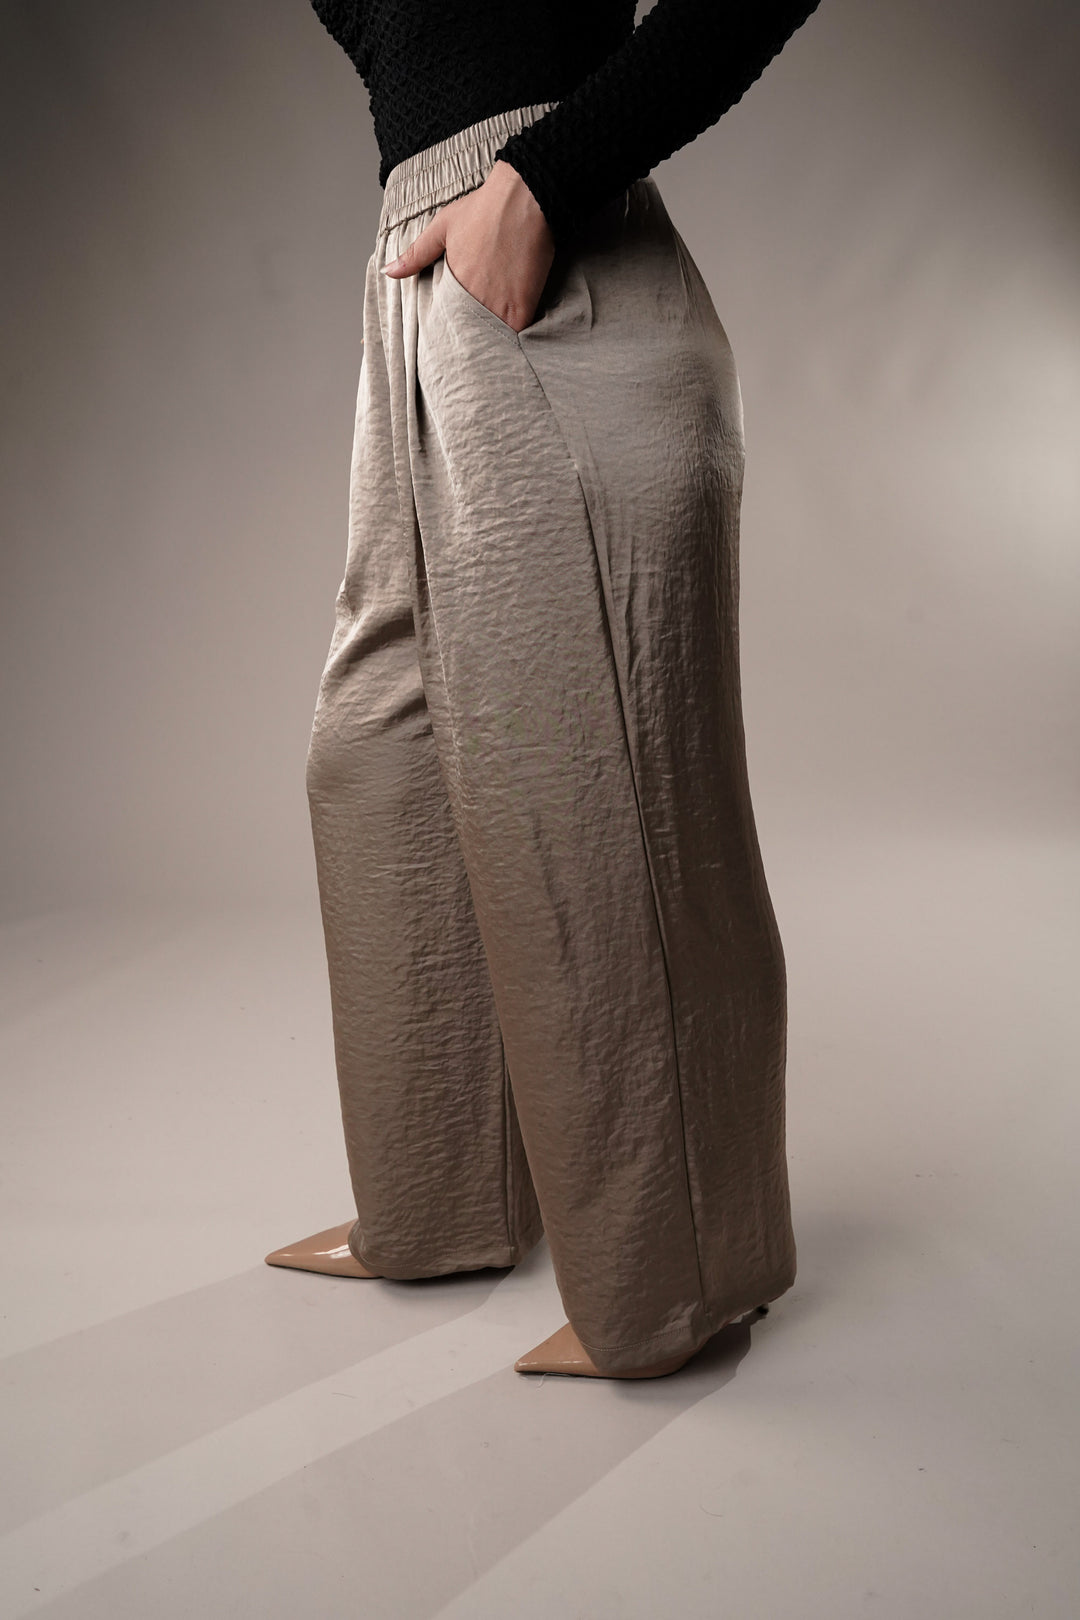 Satin blend trousers for professional attire